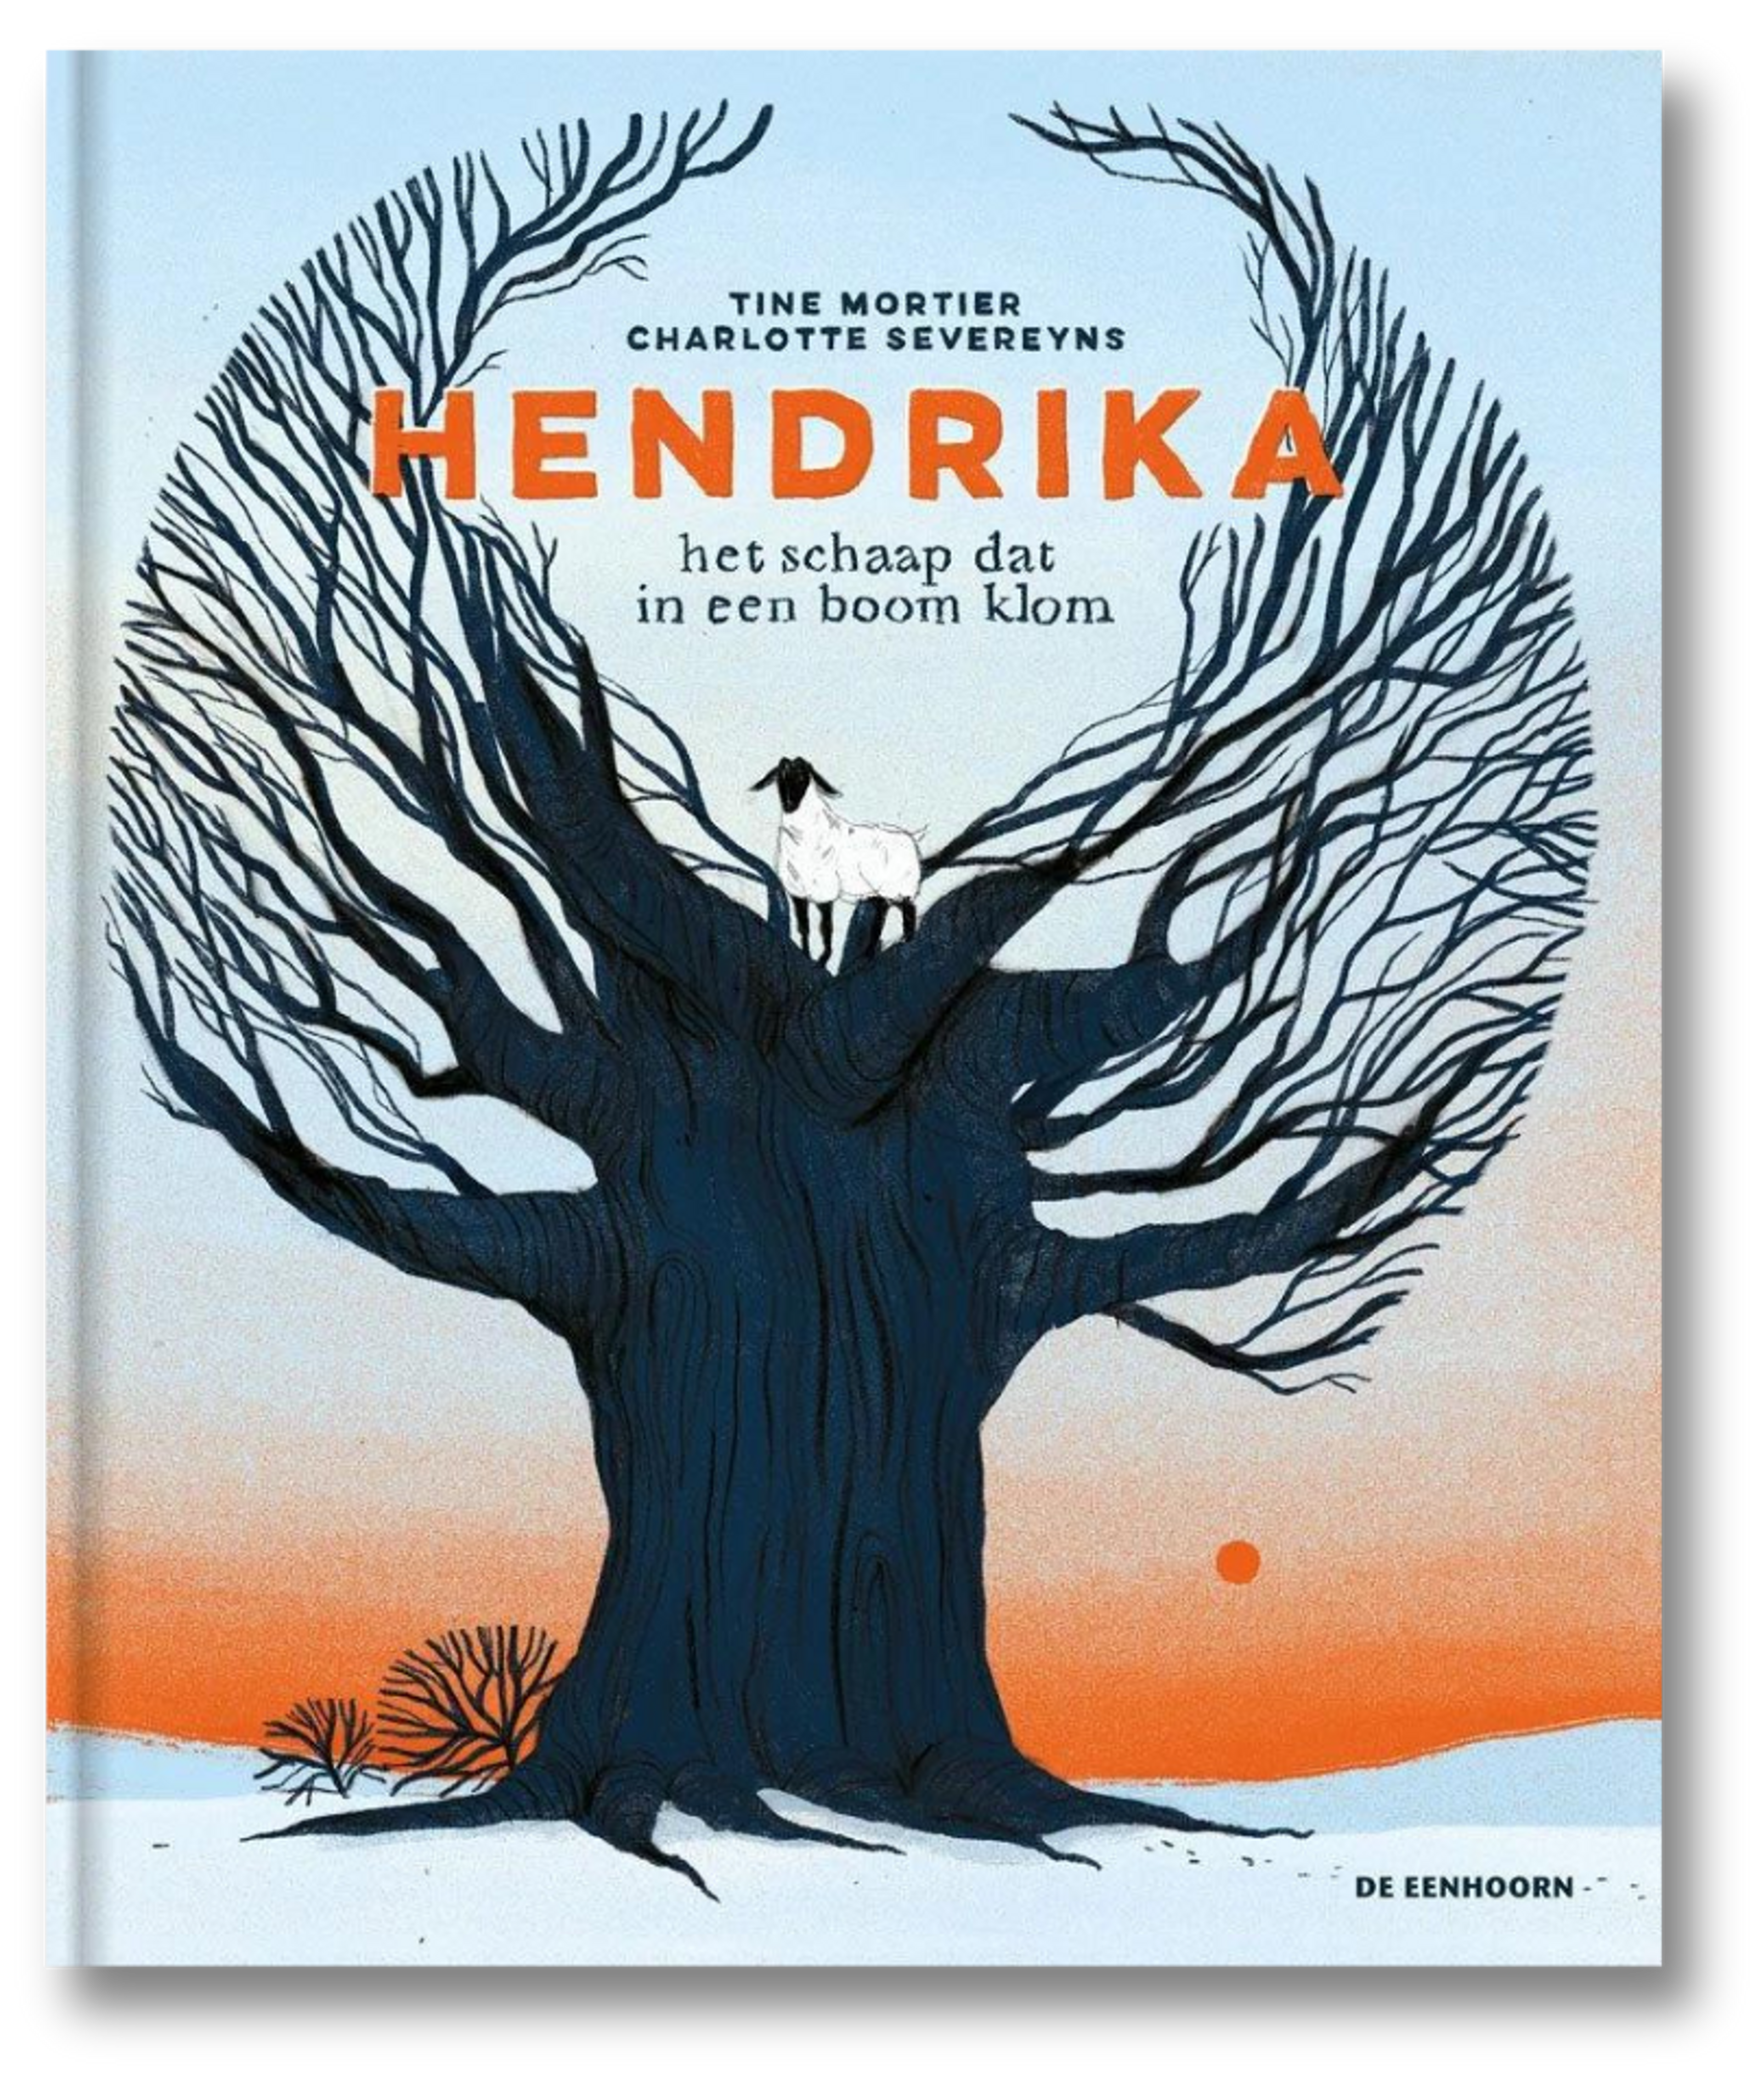 Cover for Hendrika, the sheep that climbed a tree